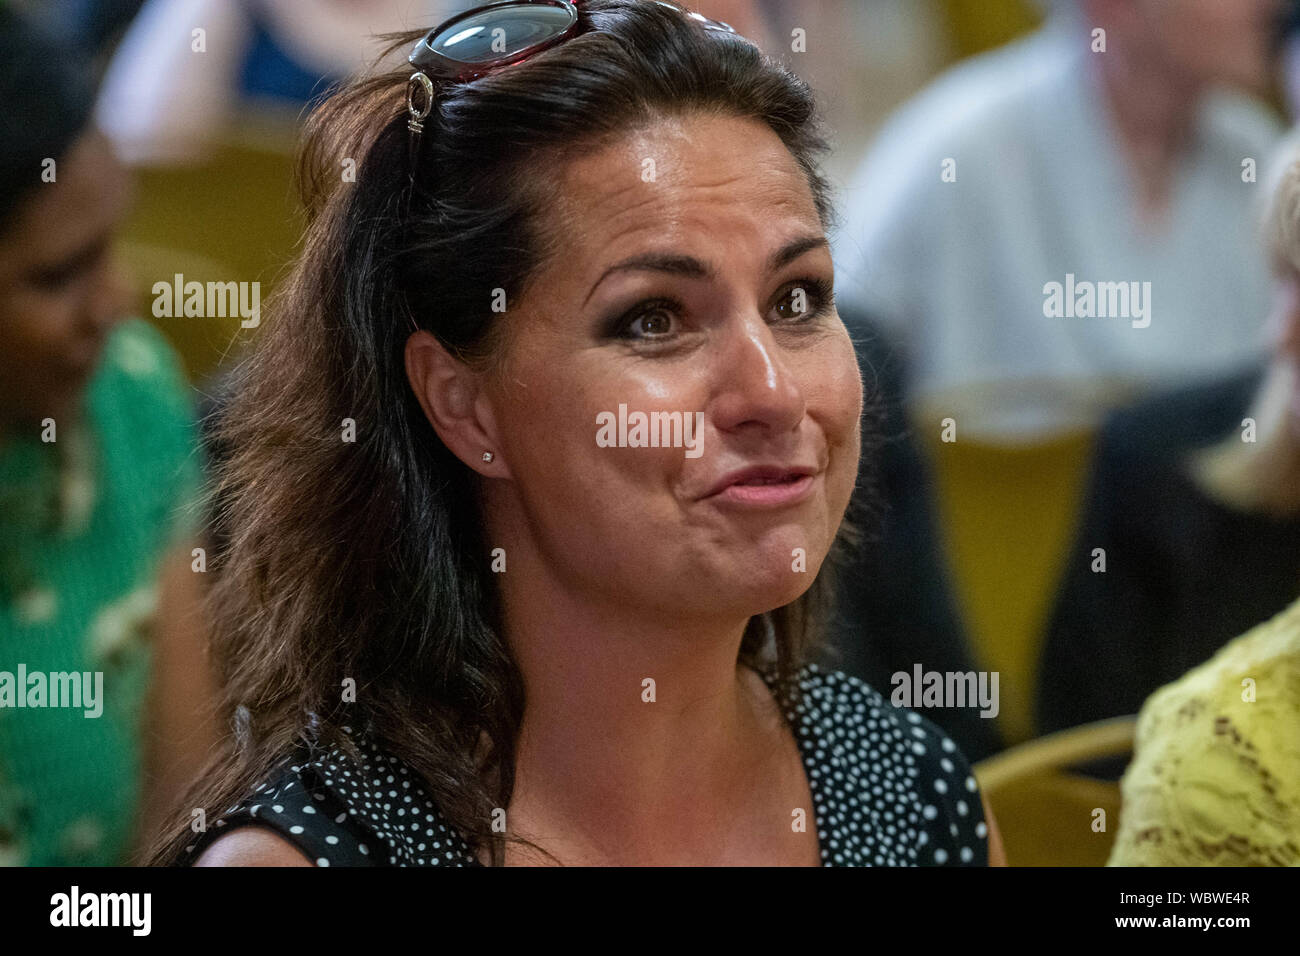 London, UK. 27 August 2019.  Church House declaration meeting of UK opposition leaders and MP's signing a declaration against the shutting down of parliament by Boris Johnson MP PC Prime Minister. Heidi Allen MP, former leader of Change UK at the meeting  Credit Ian DavidsonAlamy Live News Stock Photo